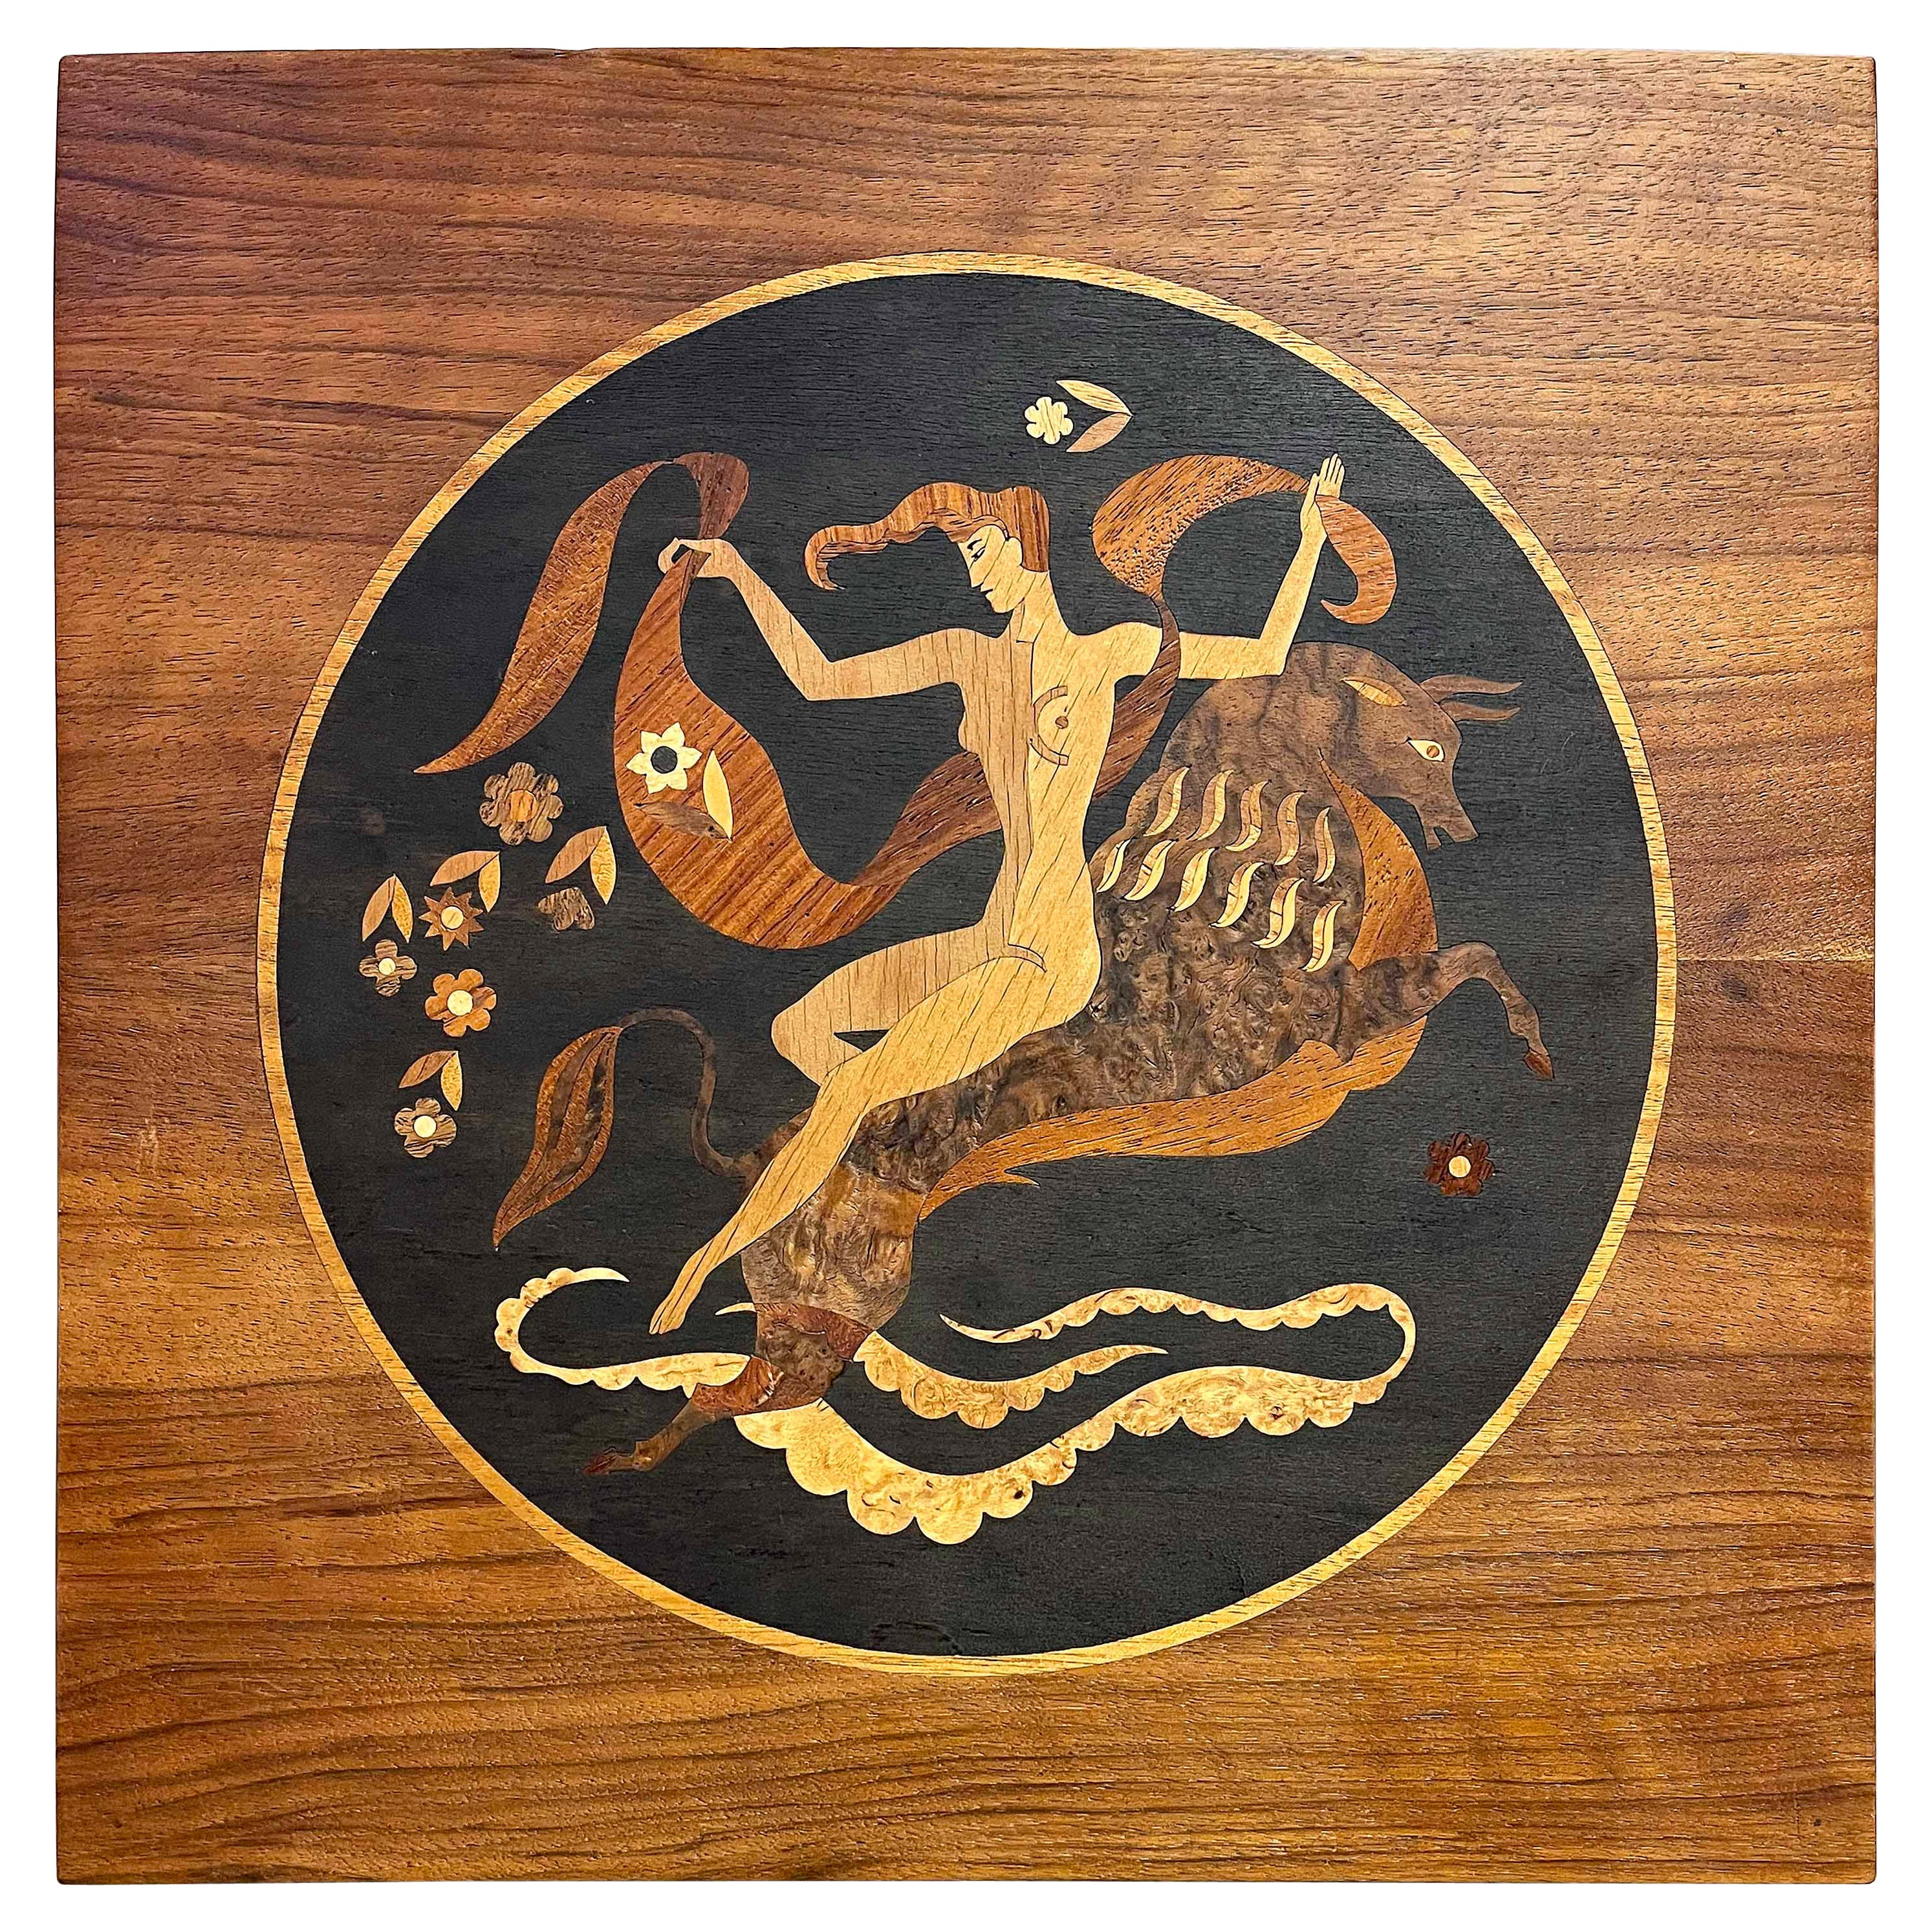 "Europa and the Bull", Art Deco Masterwork of Inlaid Wood by Szoeke, 1939 For Sale